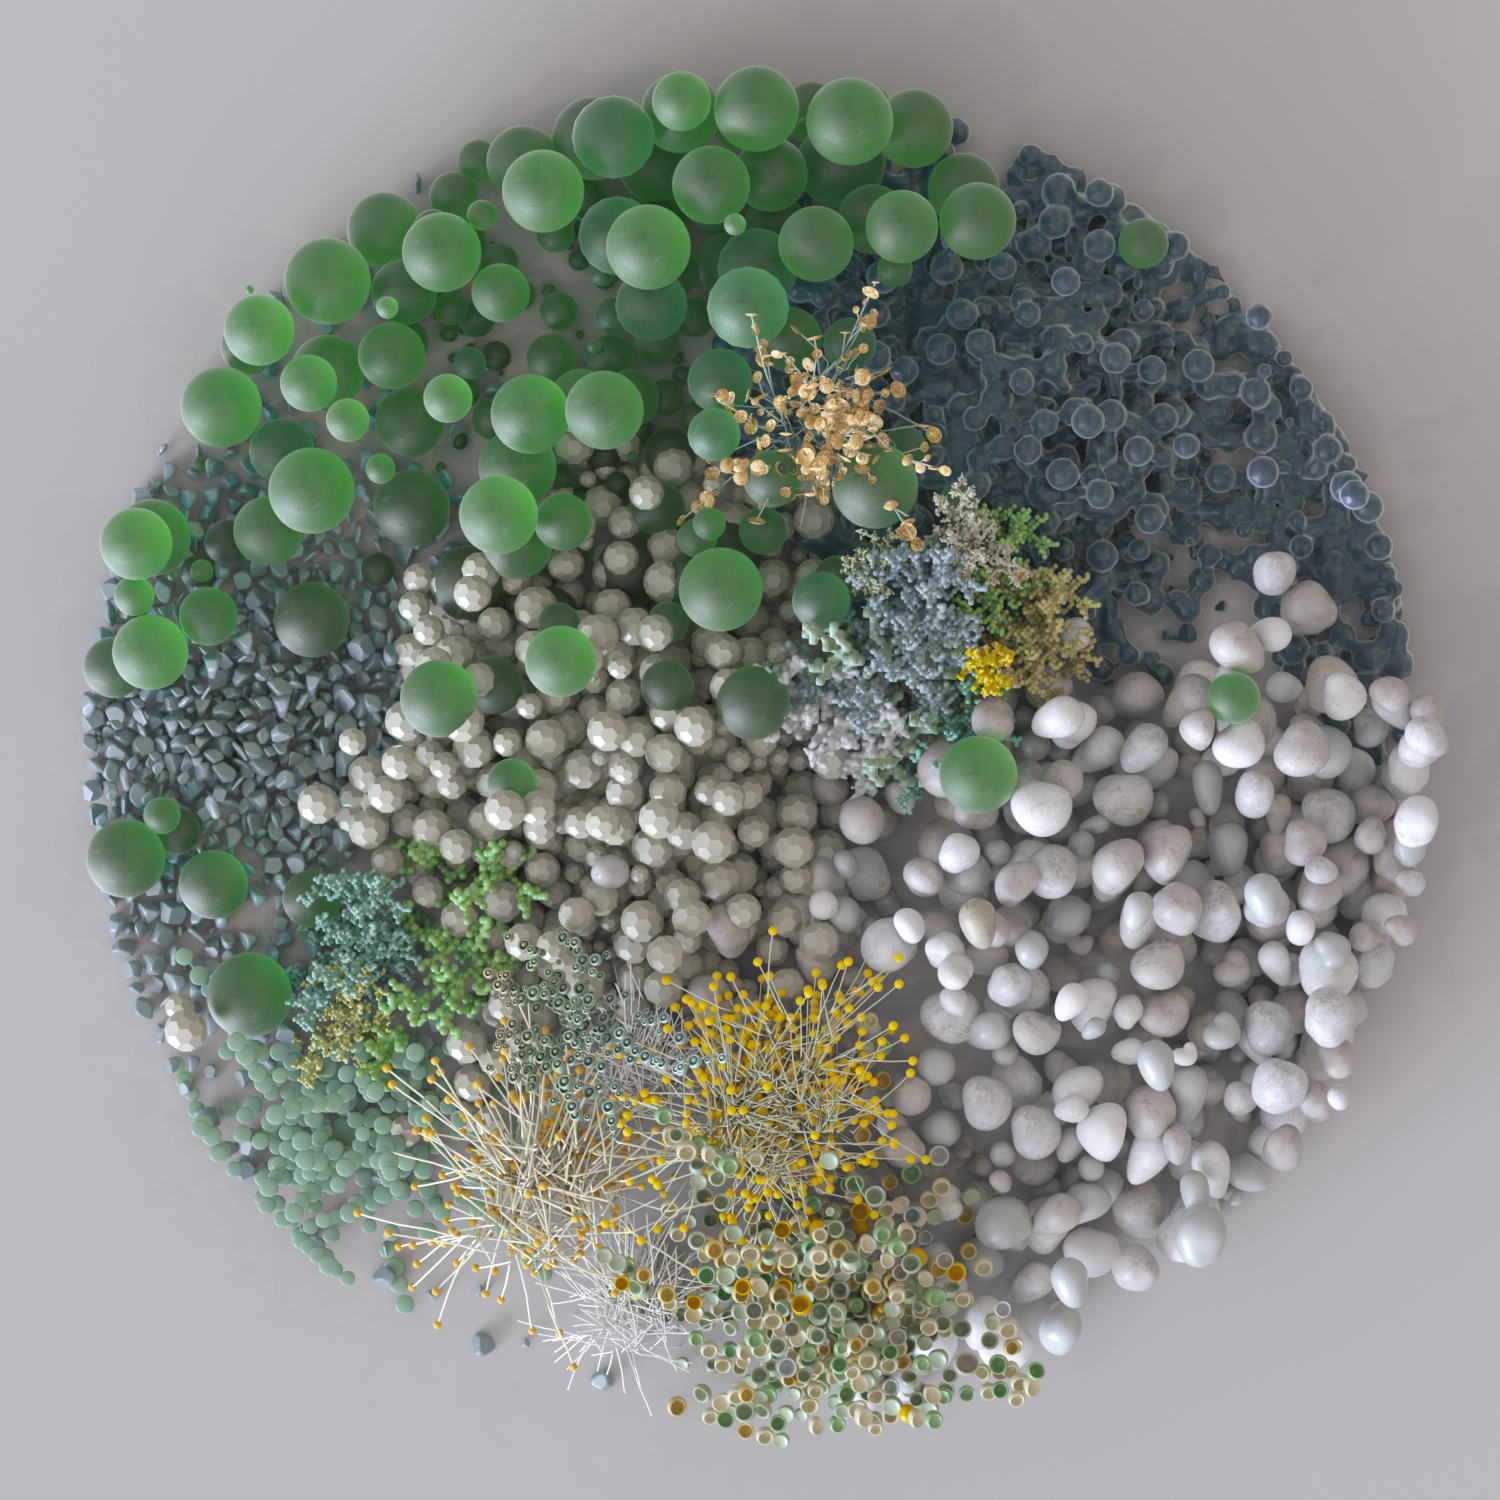 Graphic composition composed with 3D particles